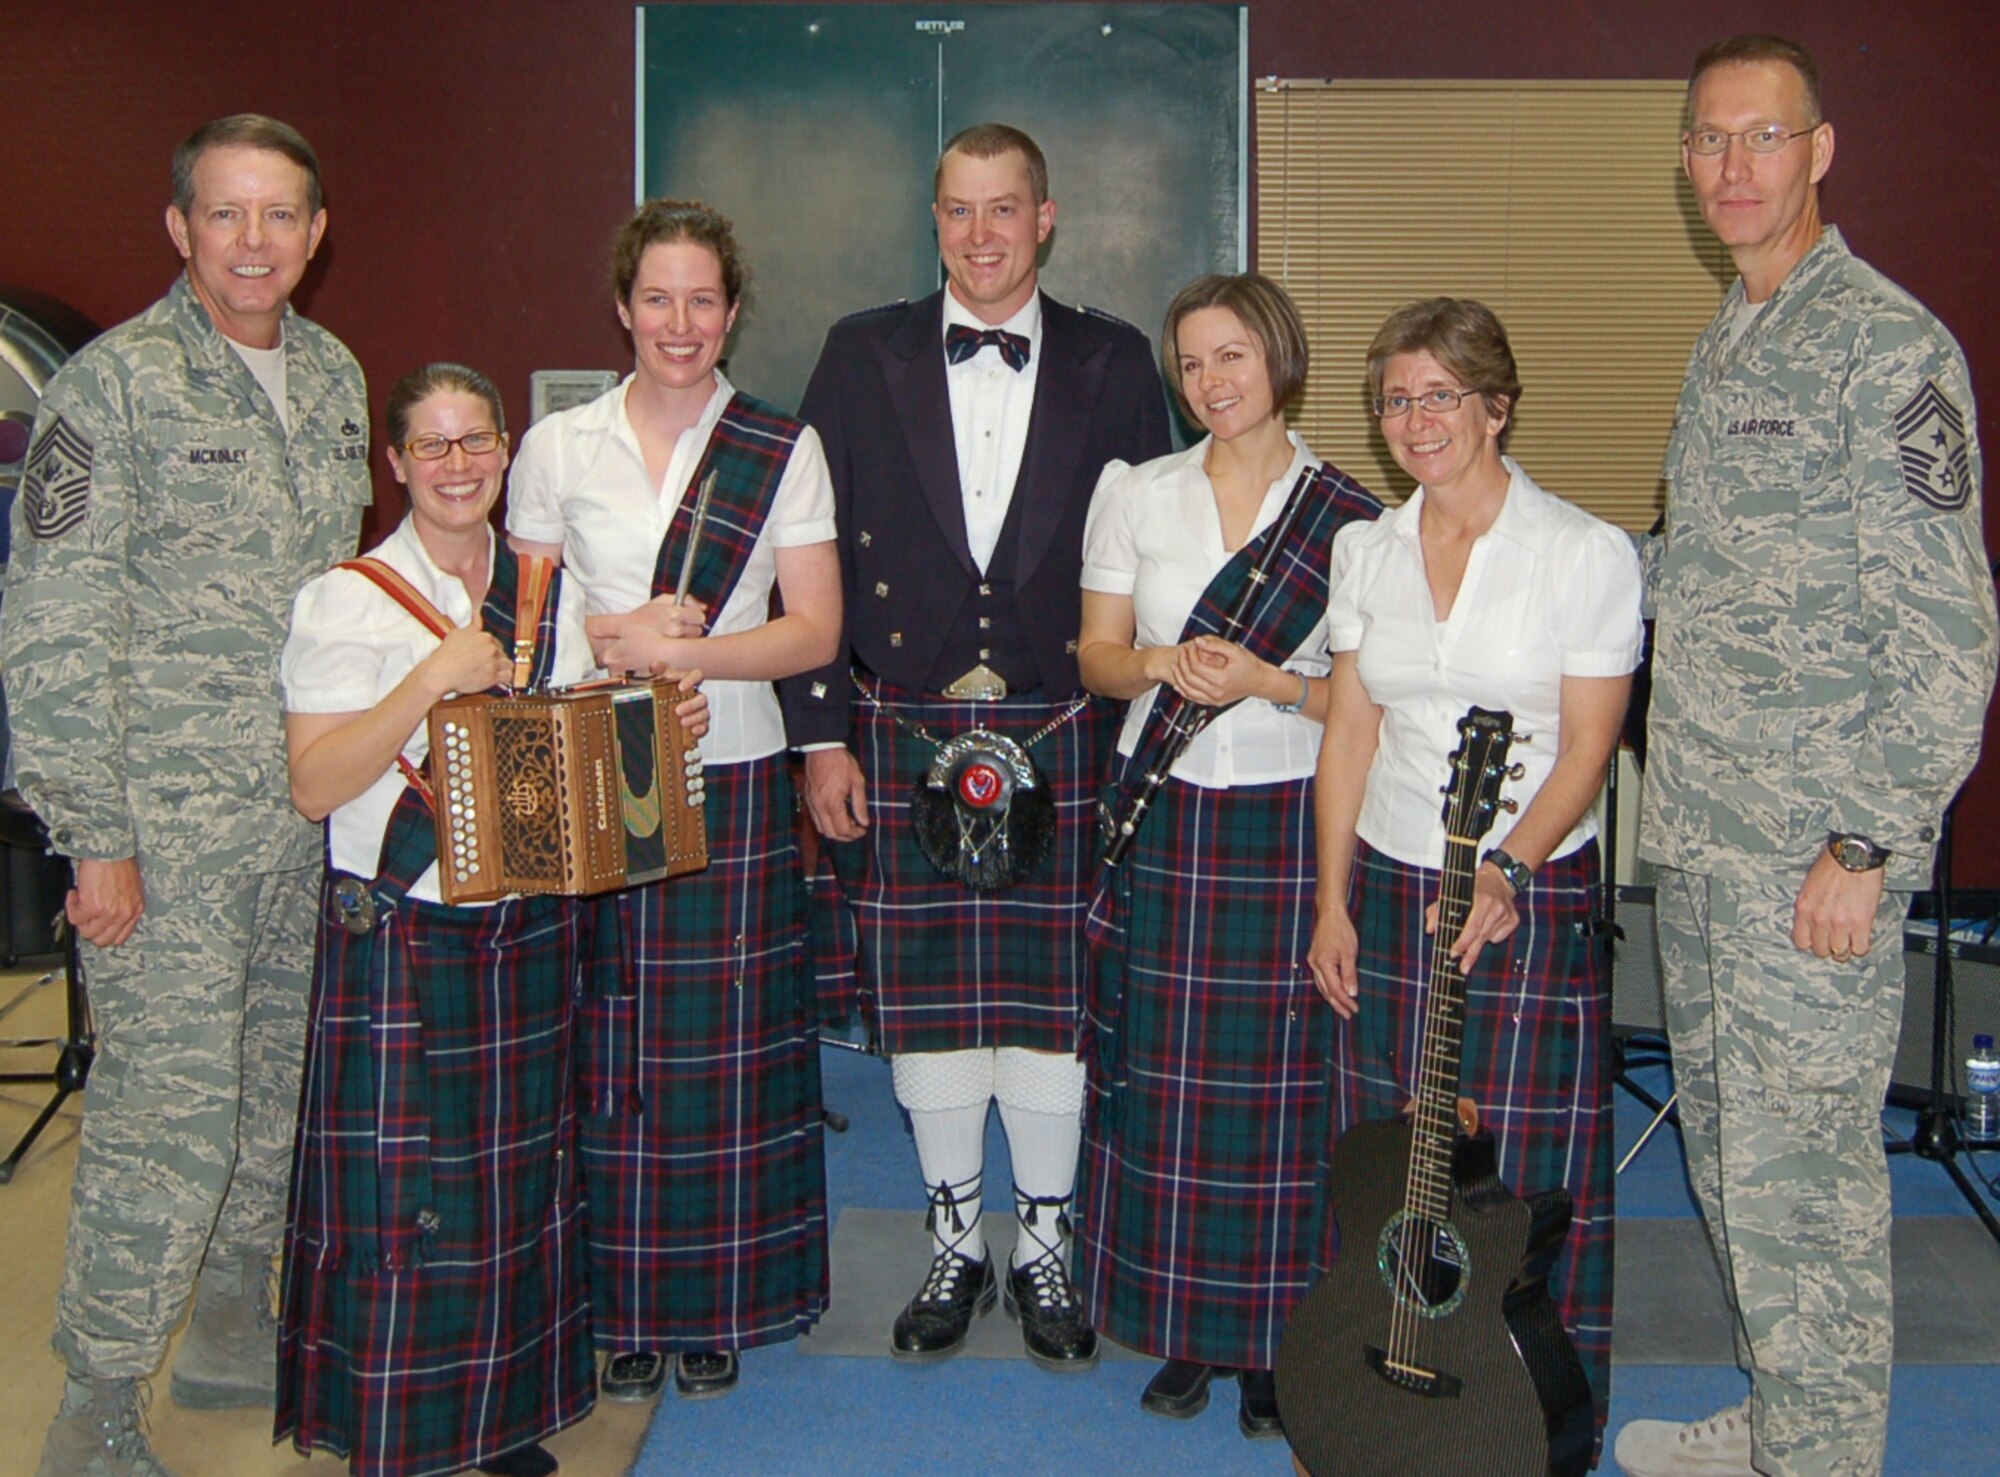 Chief Master Sergeant of the Air Force Rodney McKinley (left) and and Chief Master Sgt. Richard Small, 9th Air Force/US Central Command Air Forces command chief, pose with the USCENTAF Celtic Band "Desert Ramblers" during a break from playing for some visitors to the Combined Air and Space Operations Center in Southwest Asia.  The Desert Ramblers completed a 22-day tour visiting Coaliton Forces participating in Operation Enduring Freedom and Iraqi Freedom on Nov 7.